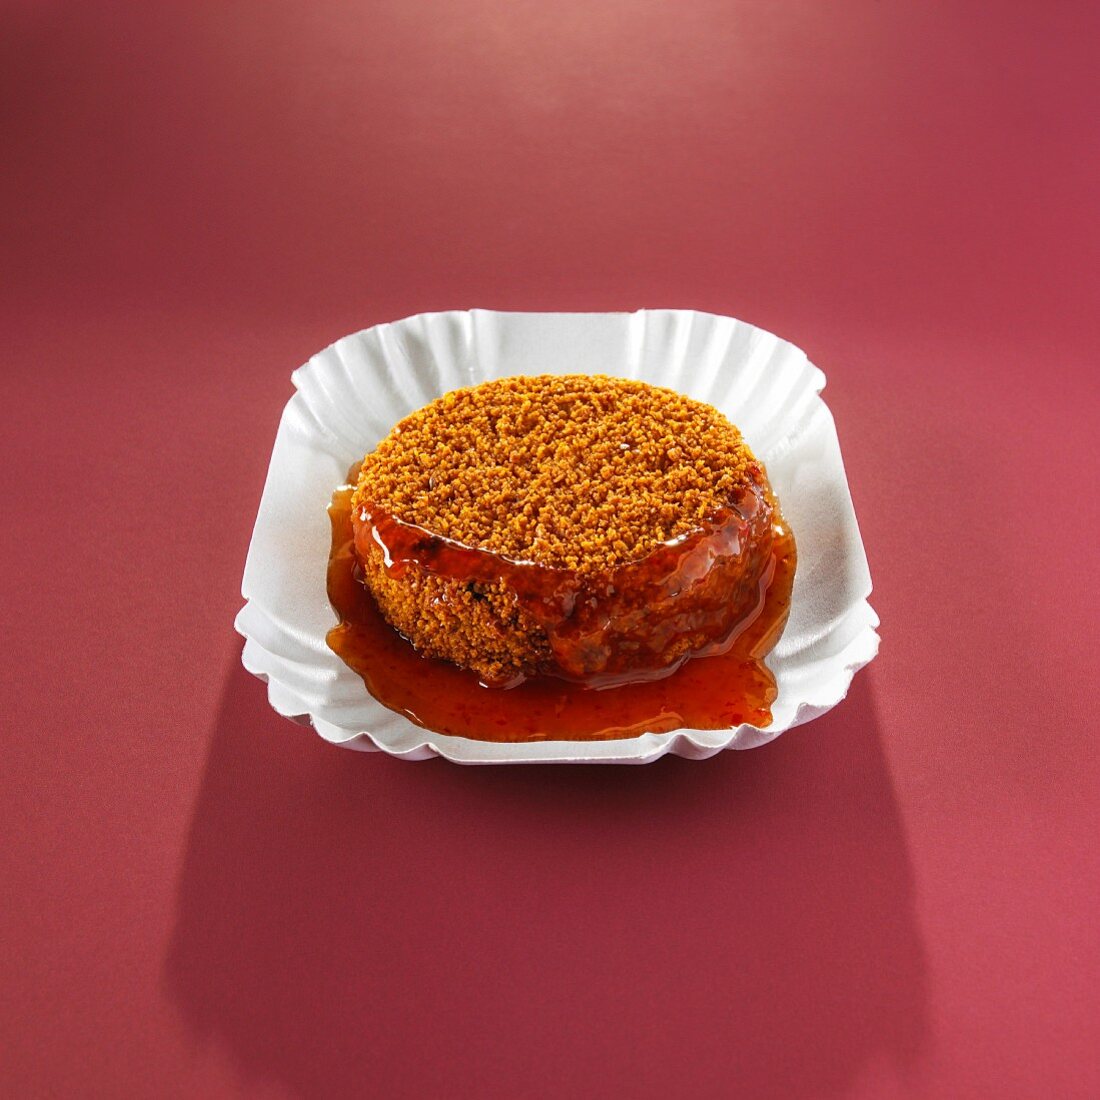 A breaded bami slice with sauce